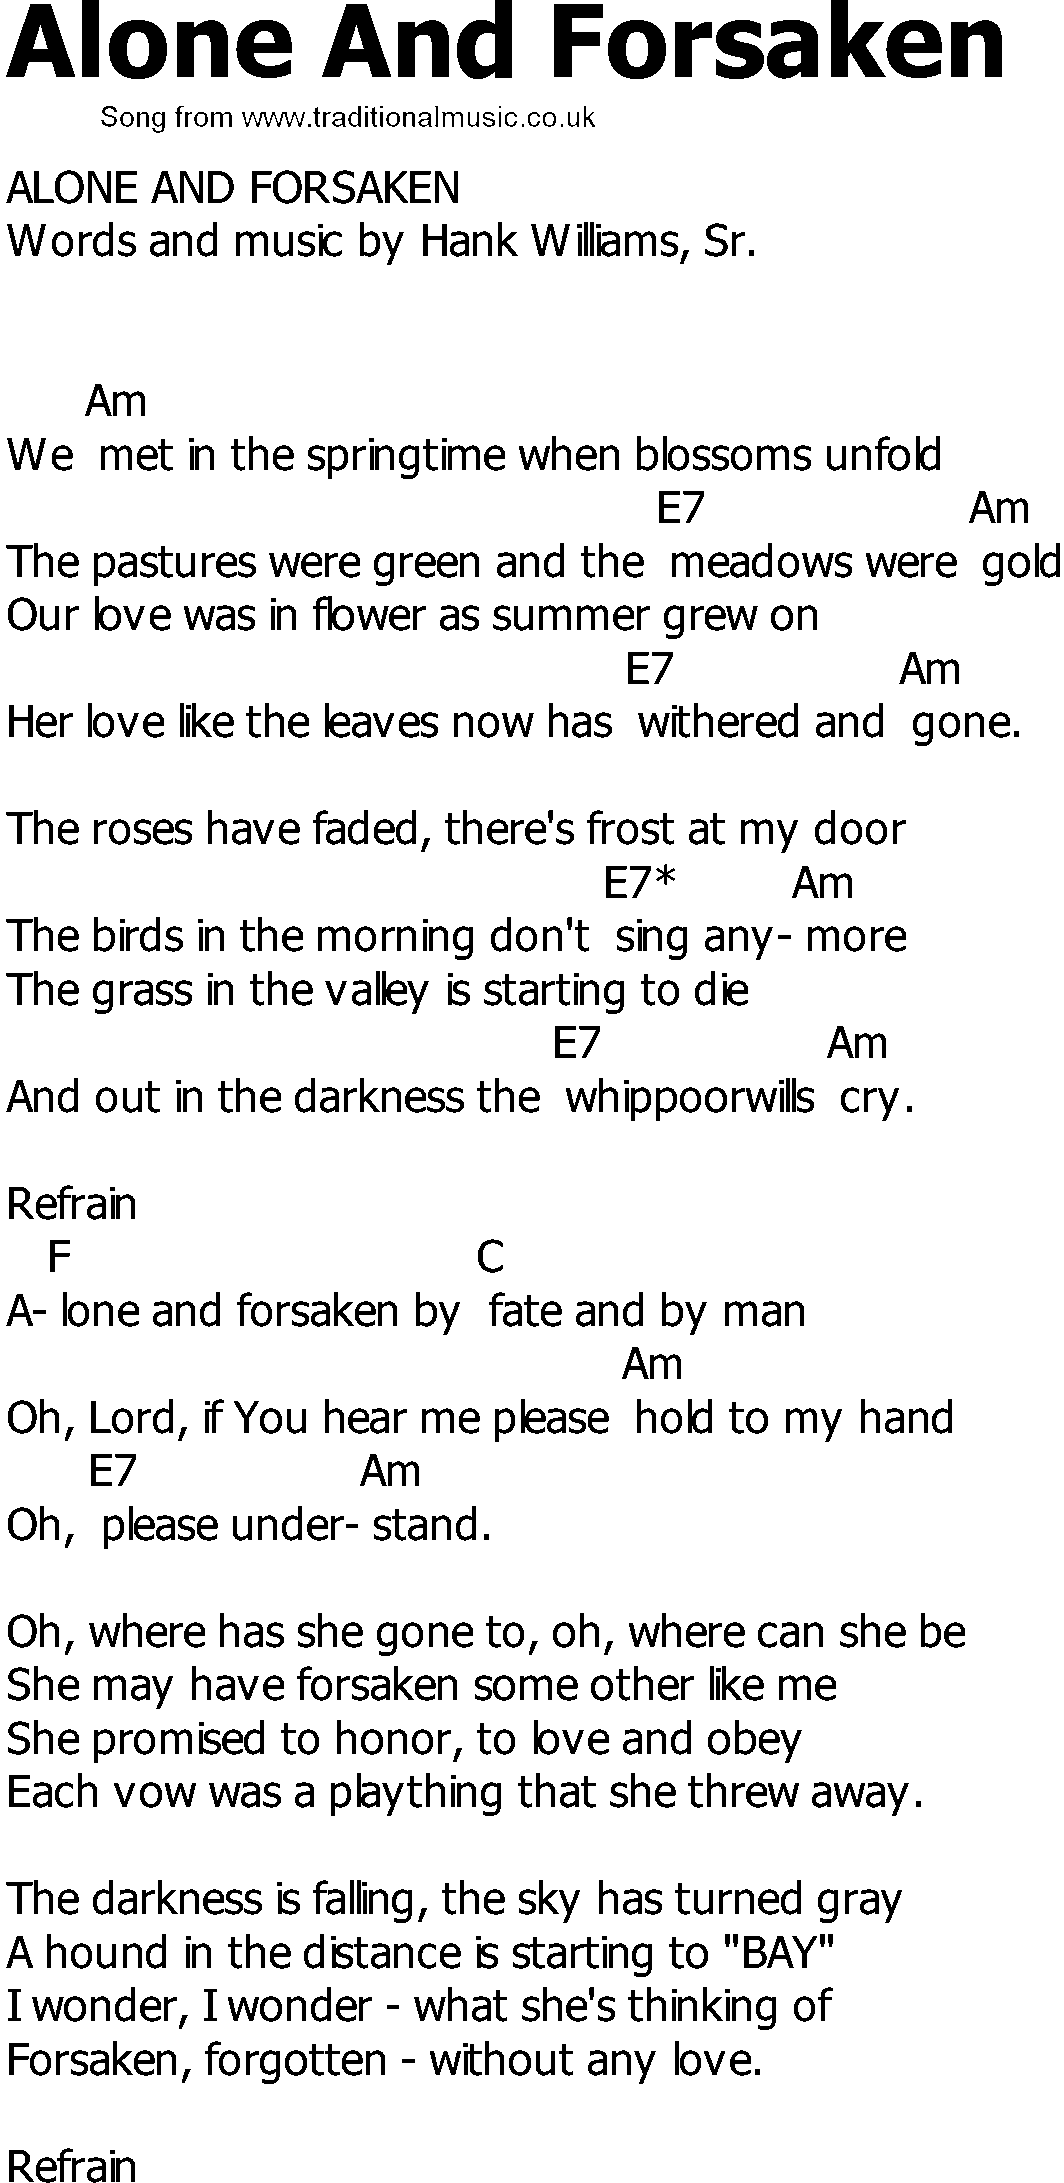 Old Country song lyrics with chords - Alone And Forsaken